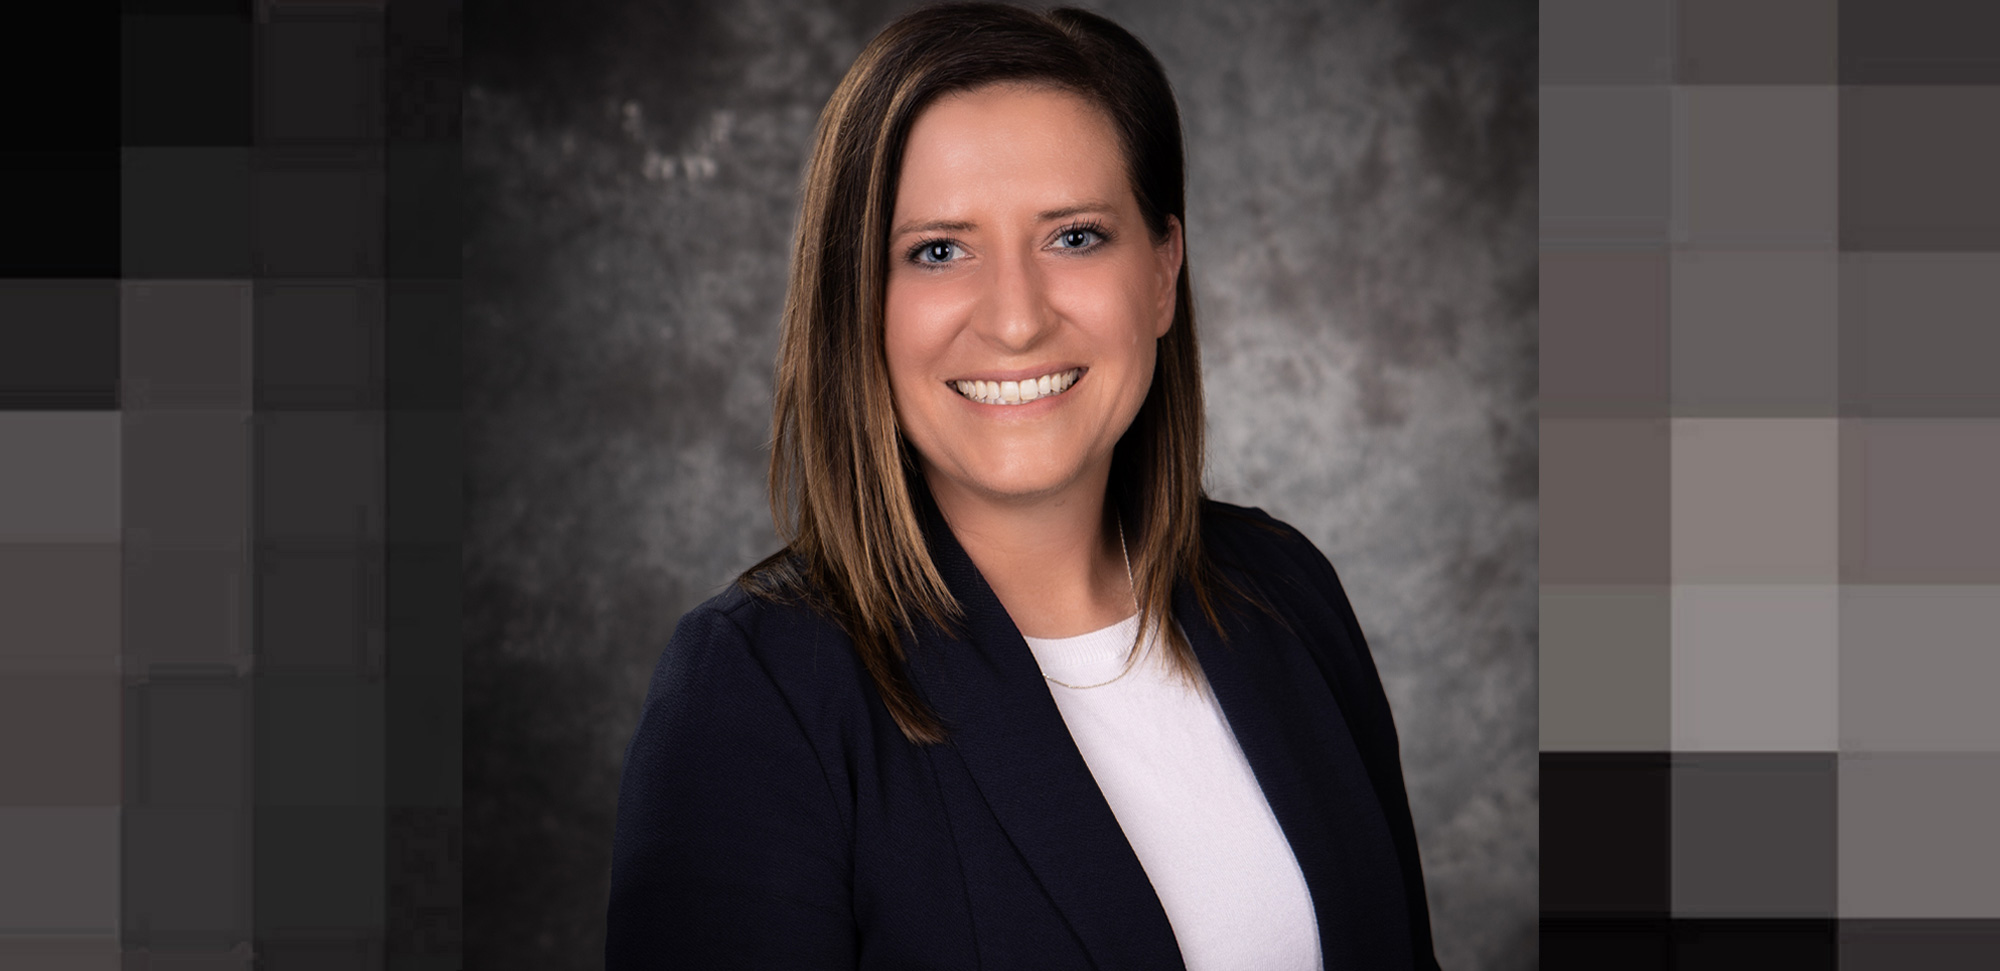 Tigers Community Credit Union promotes Dietrich to Director of Organizational Development